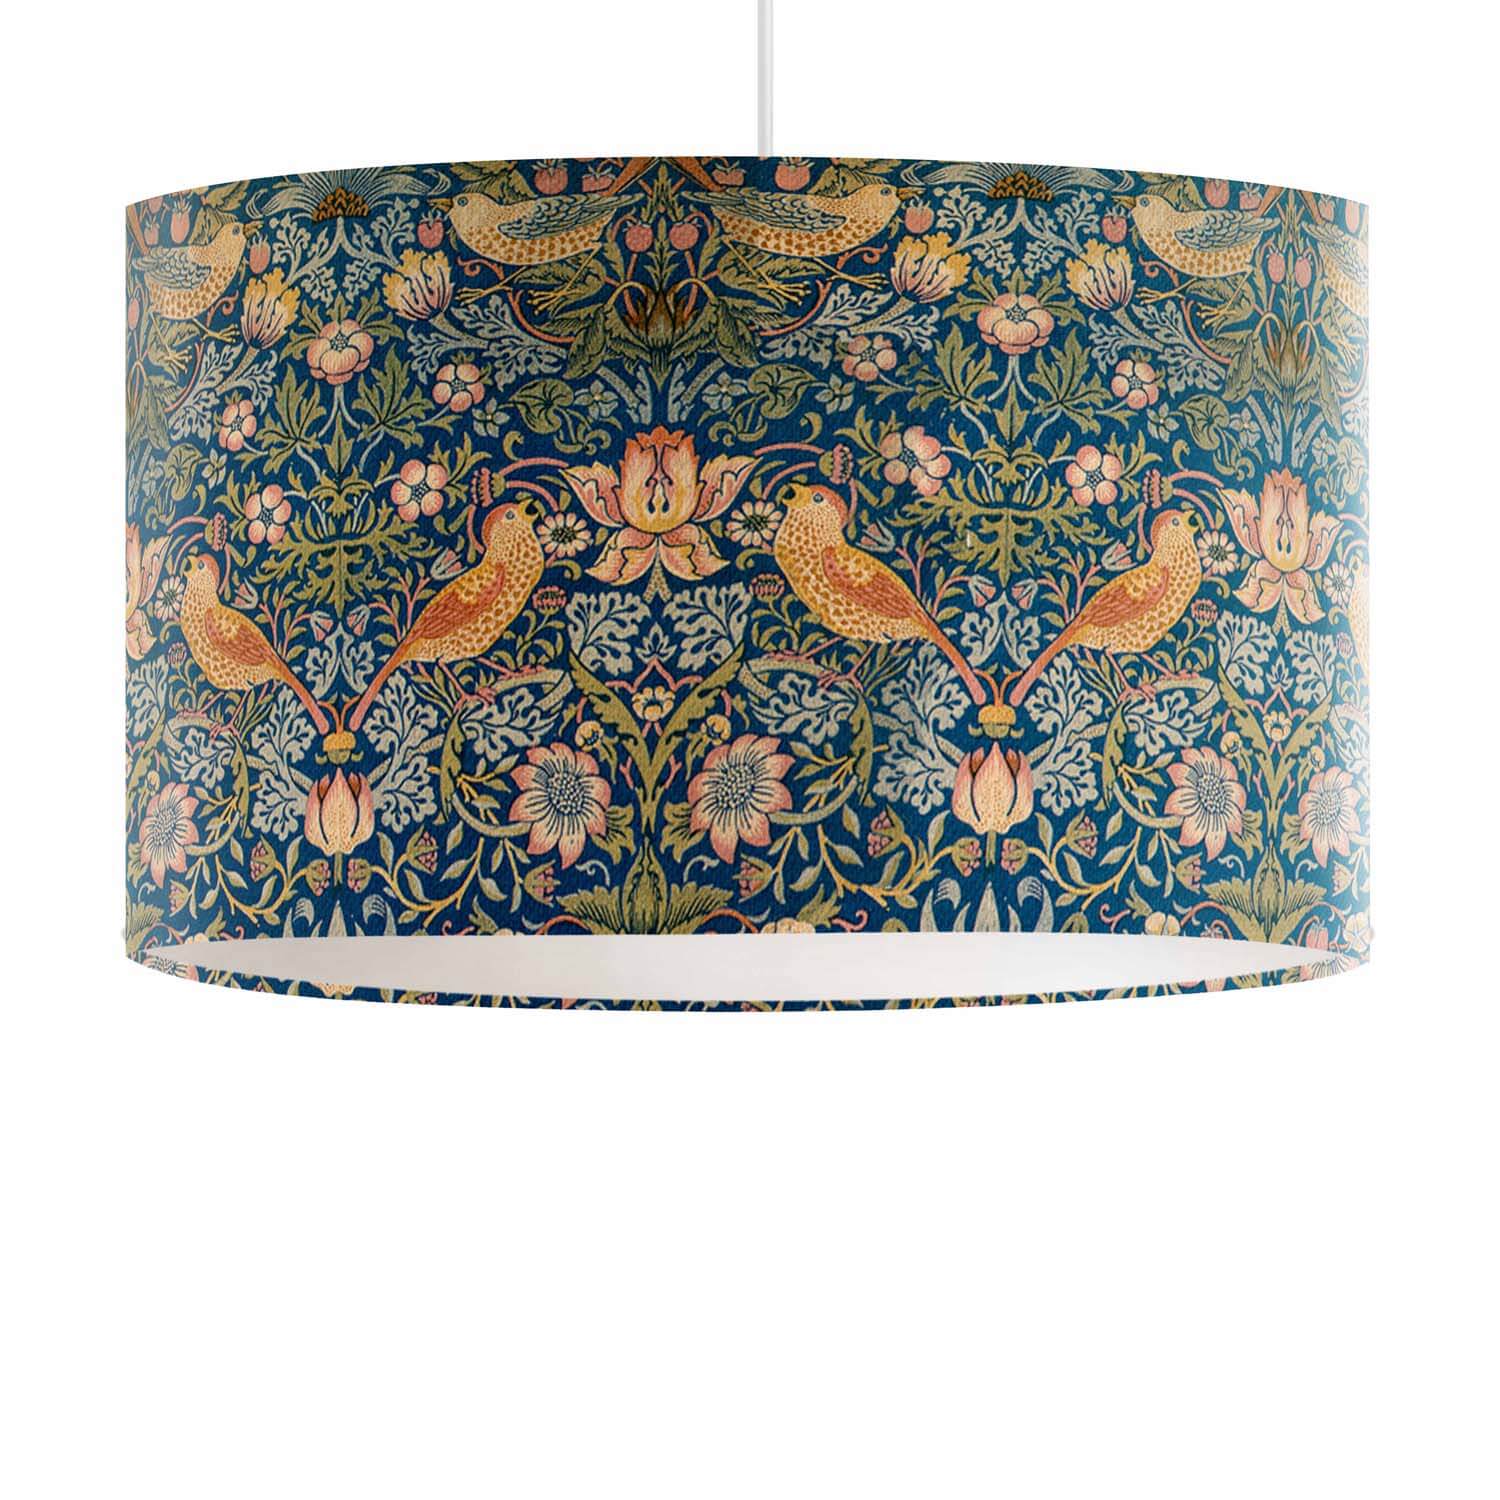 Strawberry Thief Gold - William Morris Gallery Lampshade